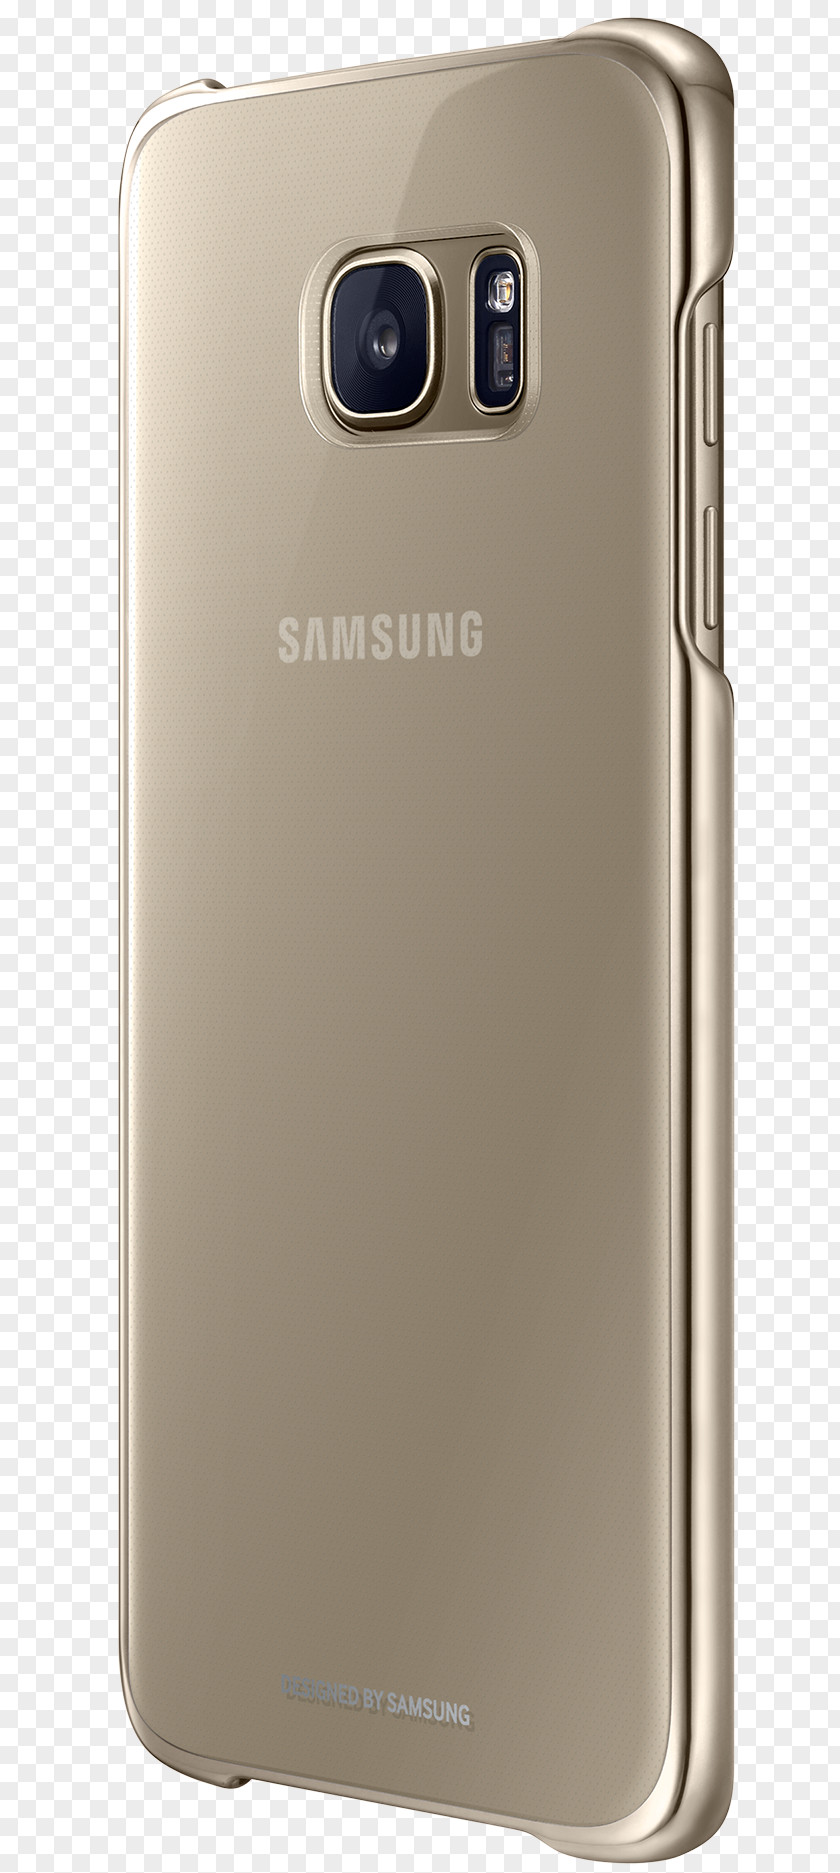 Smartphone Samsung GALAXY S7 Edge Feature Phone Galaxy Note 4 PNG